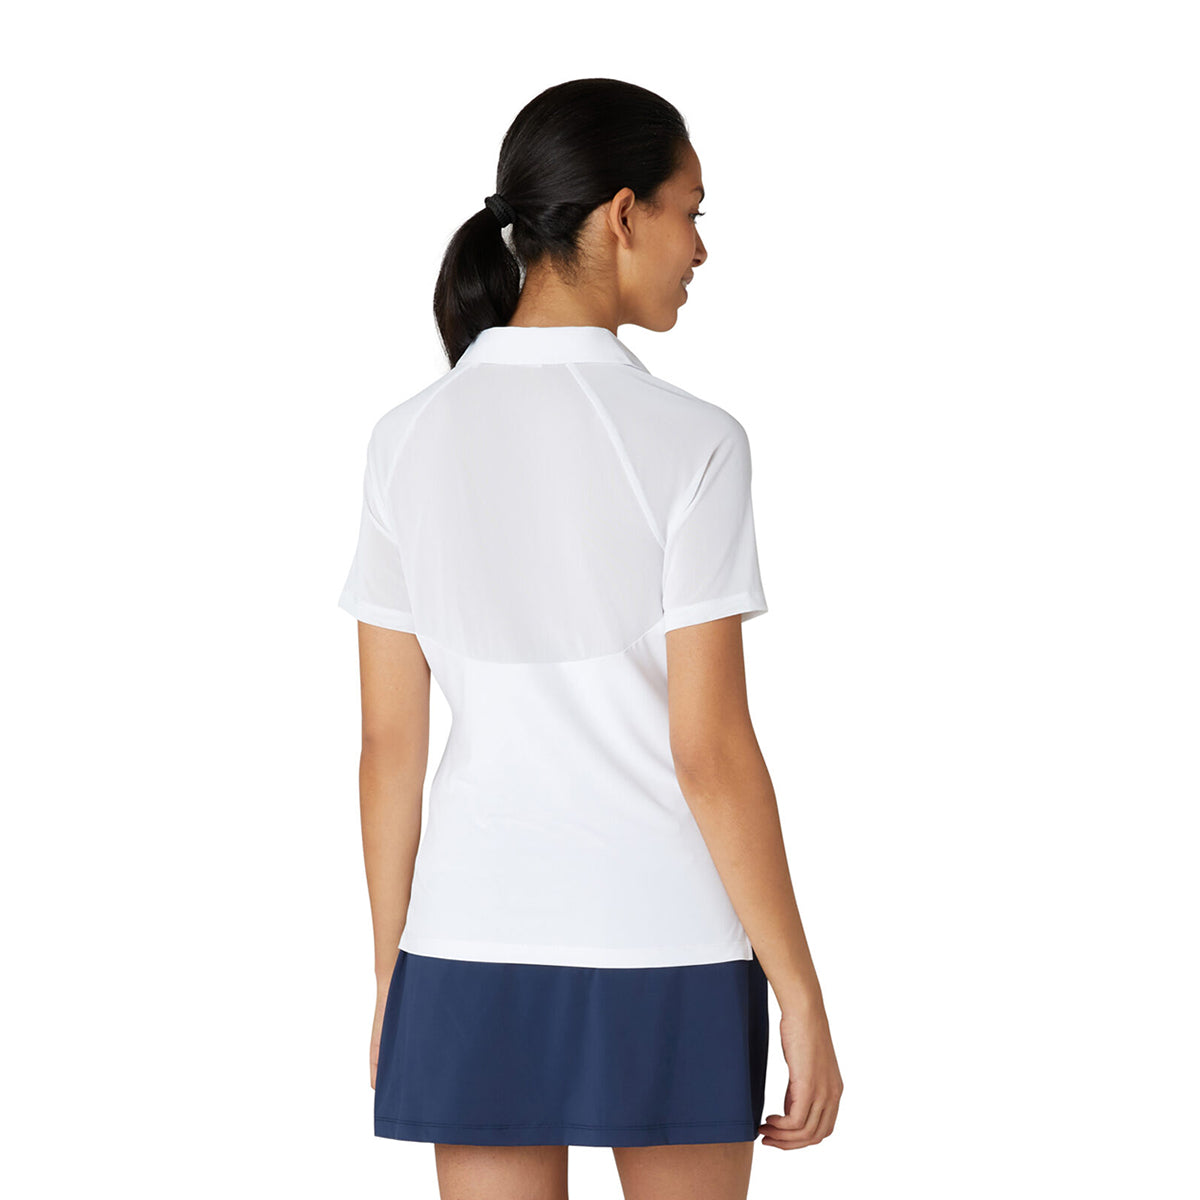 Original Penguin Ladies Short Sleeve V-Neck Polo With Mesh Detail in Bright White